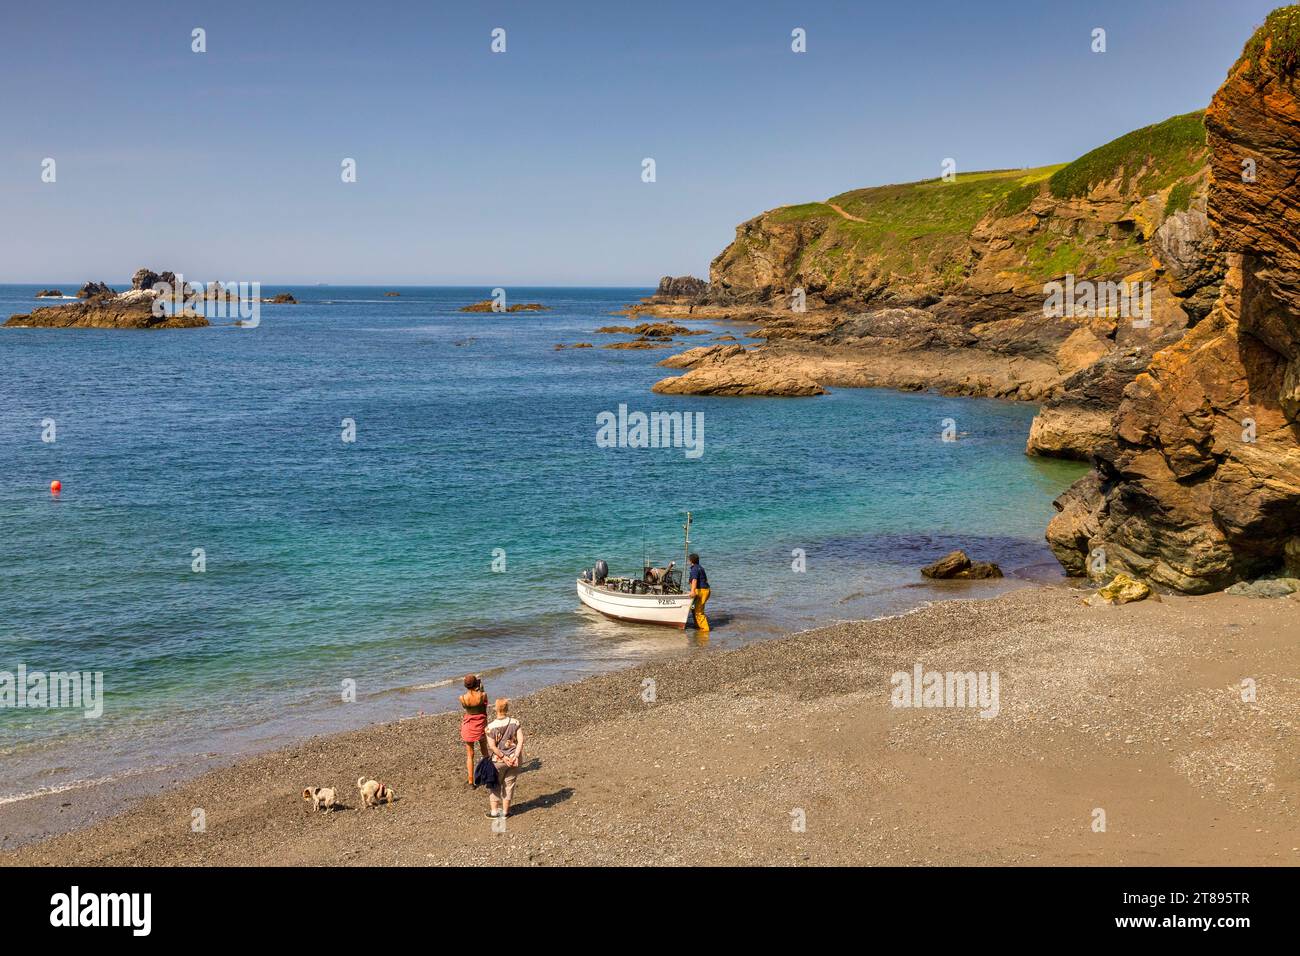 22 May 2023: Lizard Cove, Cornwall, UK - Small cove at The Lizard, with man launching a boat and tourist with two dogs. Perfect spring day. Stock Photo